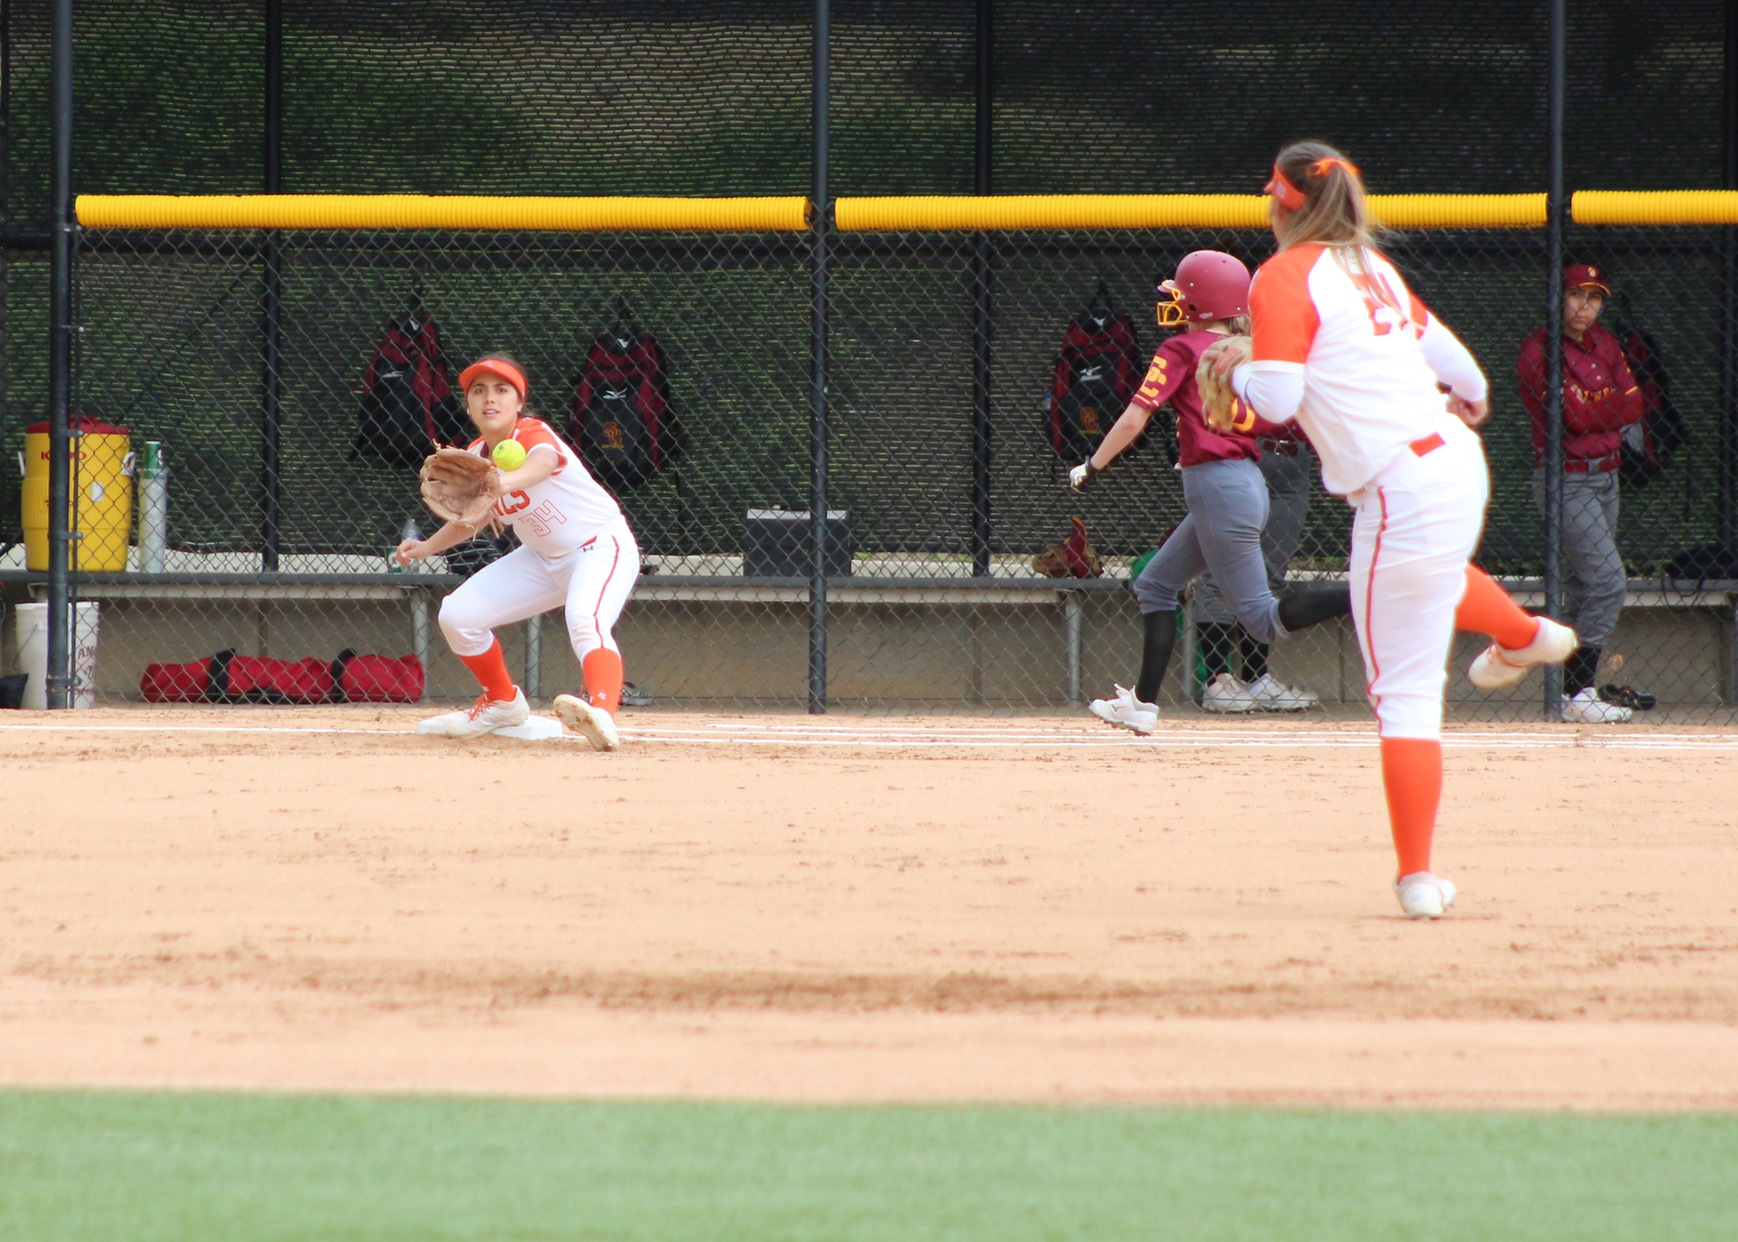 Alex Valenzuela stretches at 1st on the throw from Katie Kempton to get the runner. Image: Treyvon Watts-Hale